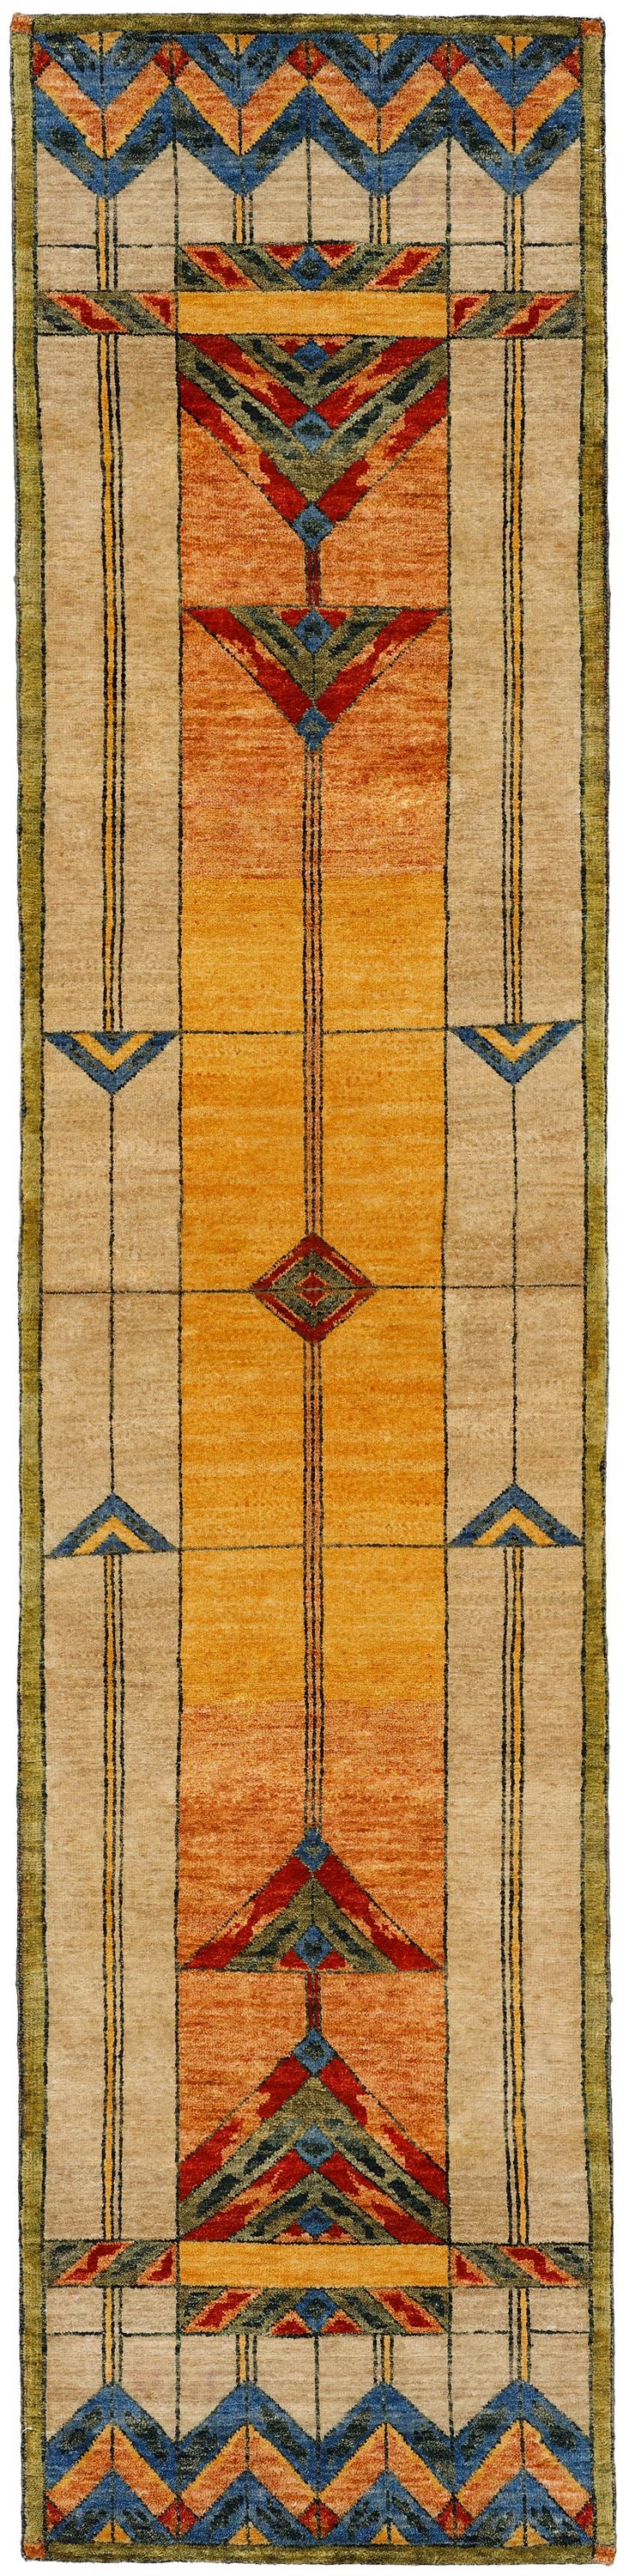 rugs with a stained glass design